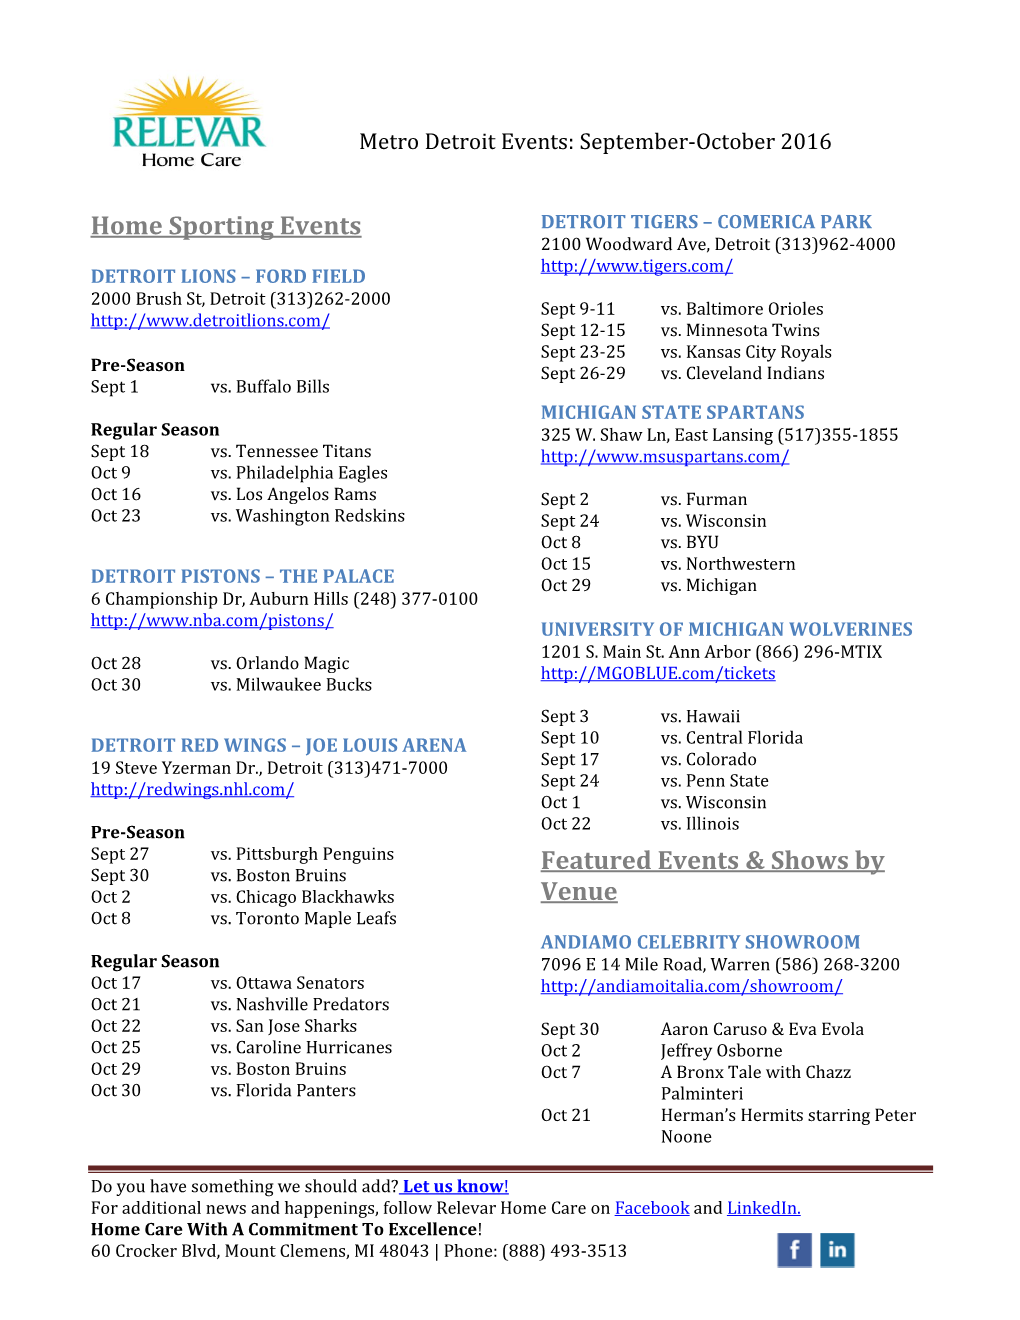 Home Sporting Events Featured Events & Shows by Venue